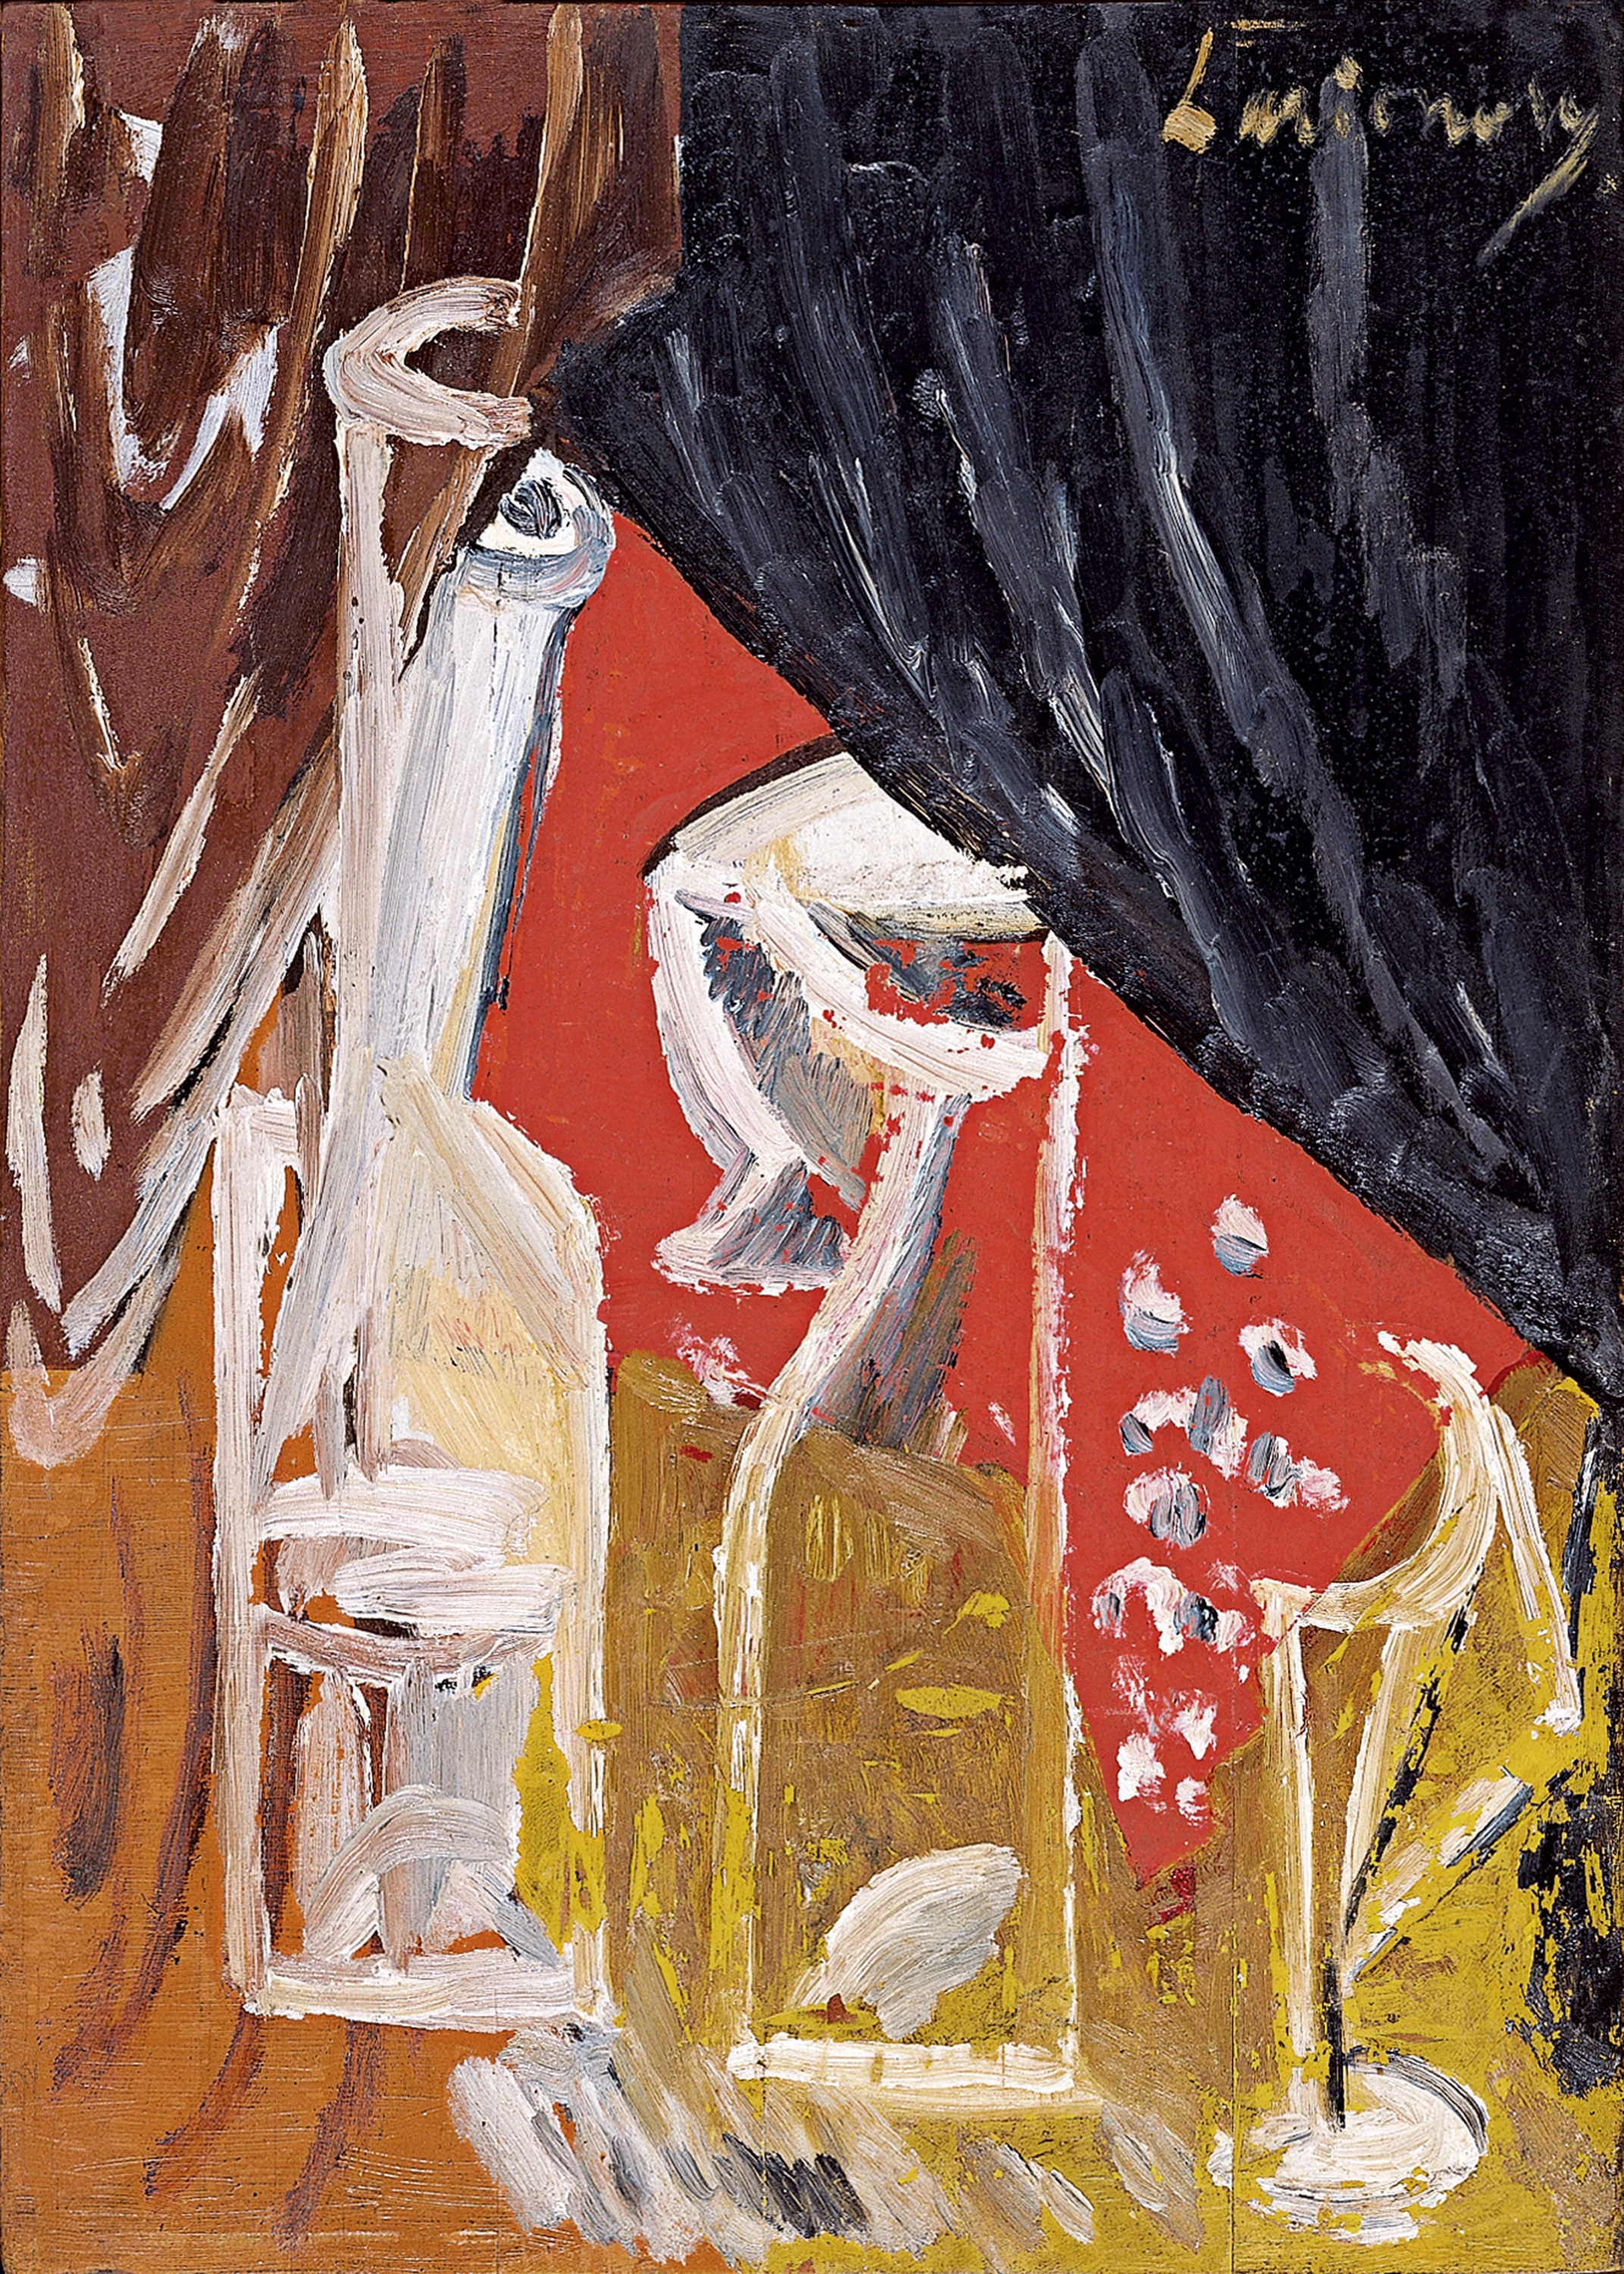 Still Life with Carafe and Curtains, Mikhail Larionov